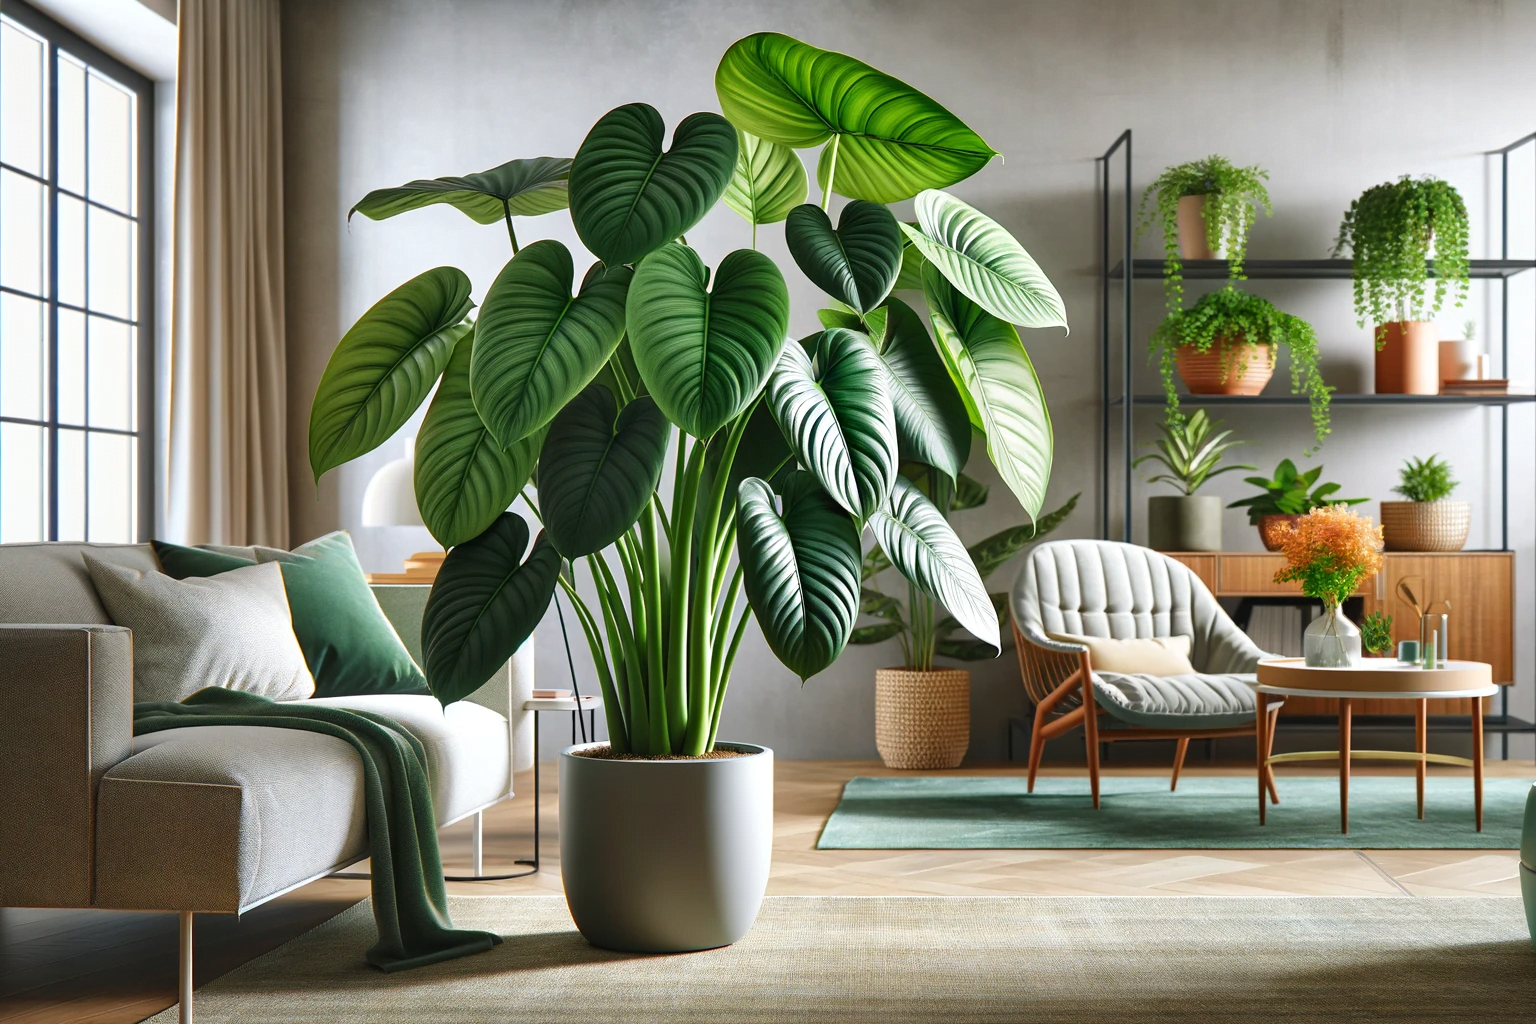 A vibrant, lush indoor space with a prominently featured Congo Green Philodendron, showcasing its large, glossy, heart-shaped leaves. The setting is a stylishly decorated room with modern furnishings, suggesting a cozy and inviting atmosphere.